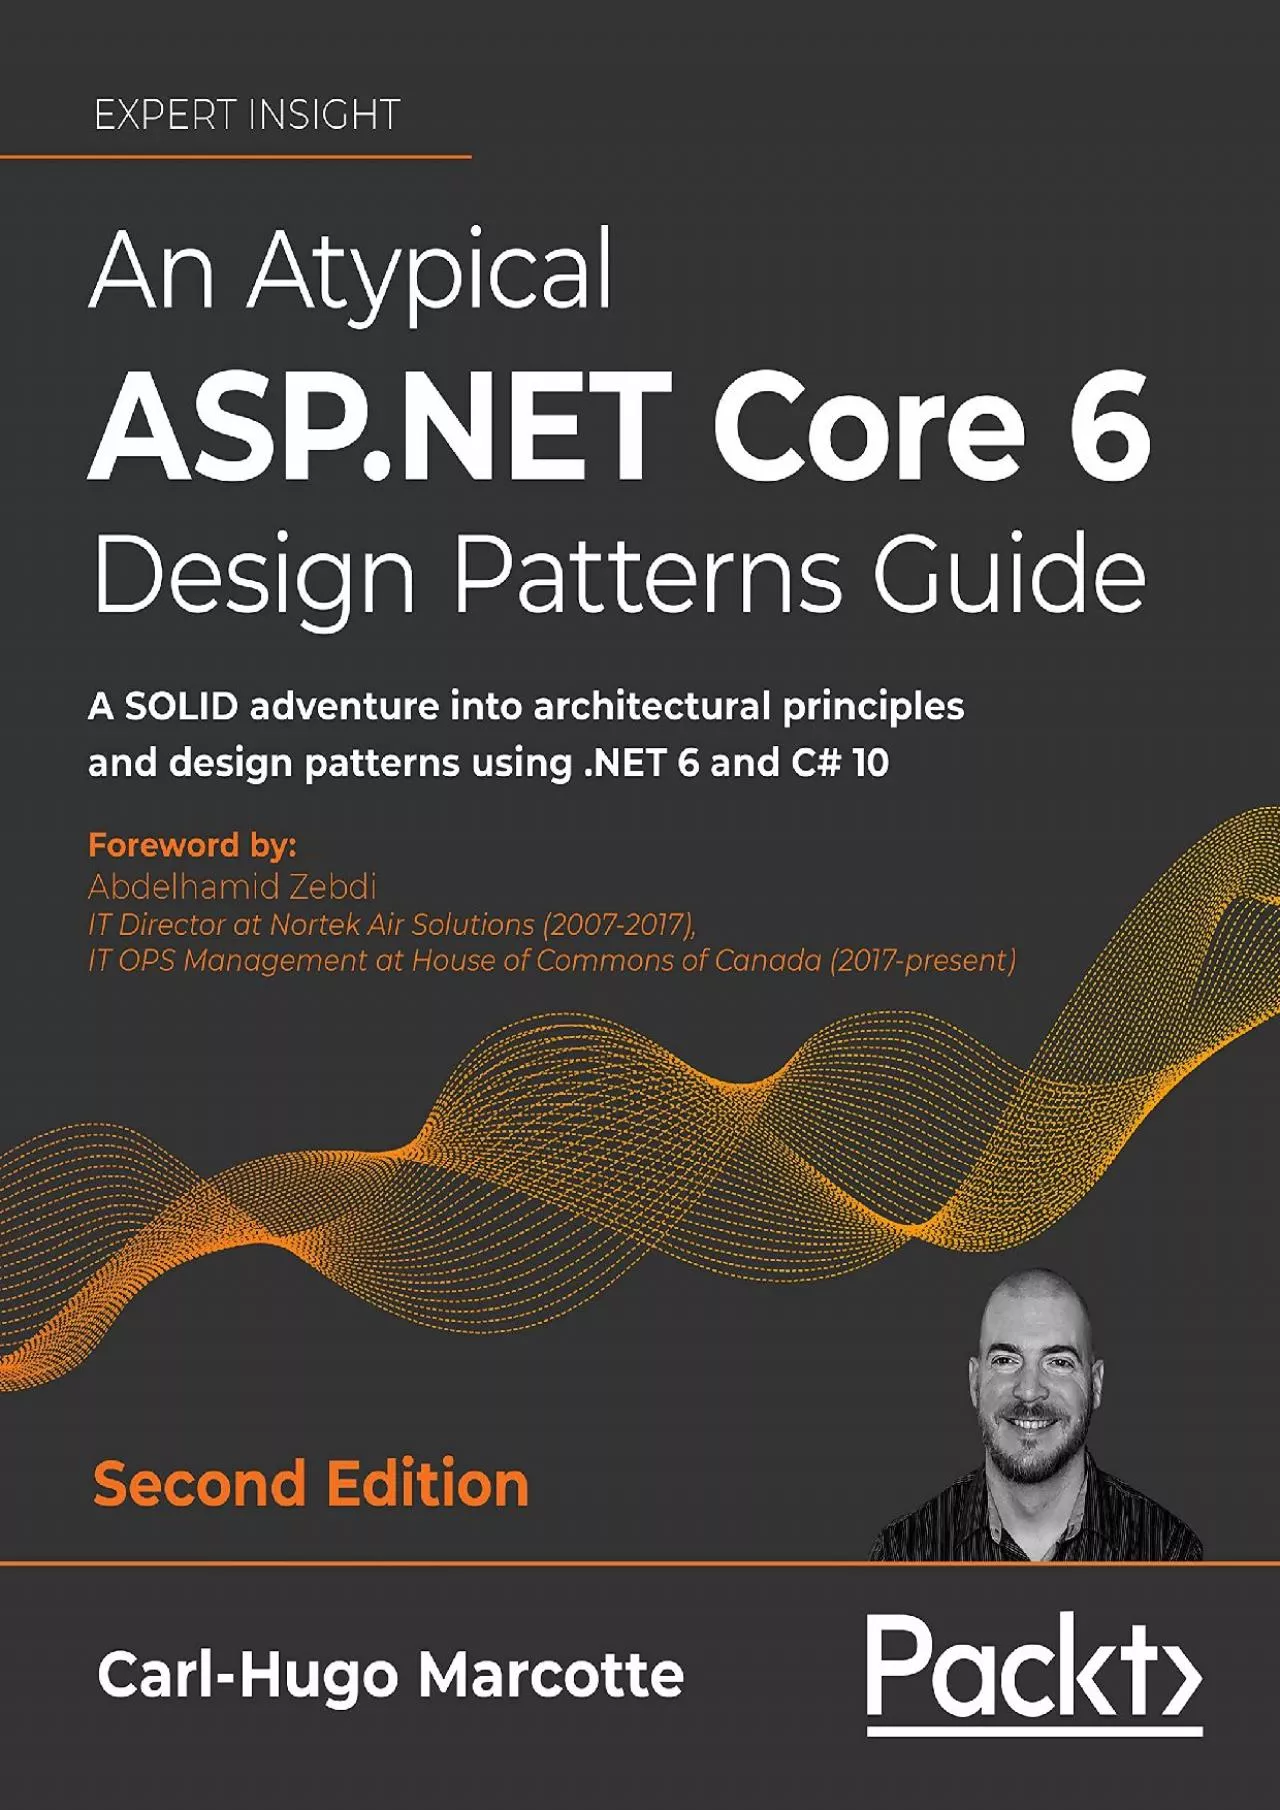 [READING BOOK]-An Atypical ASP.NET Core 6 Design Patterns Guide: A SOLID adventure into